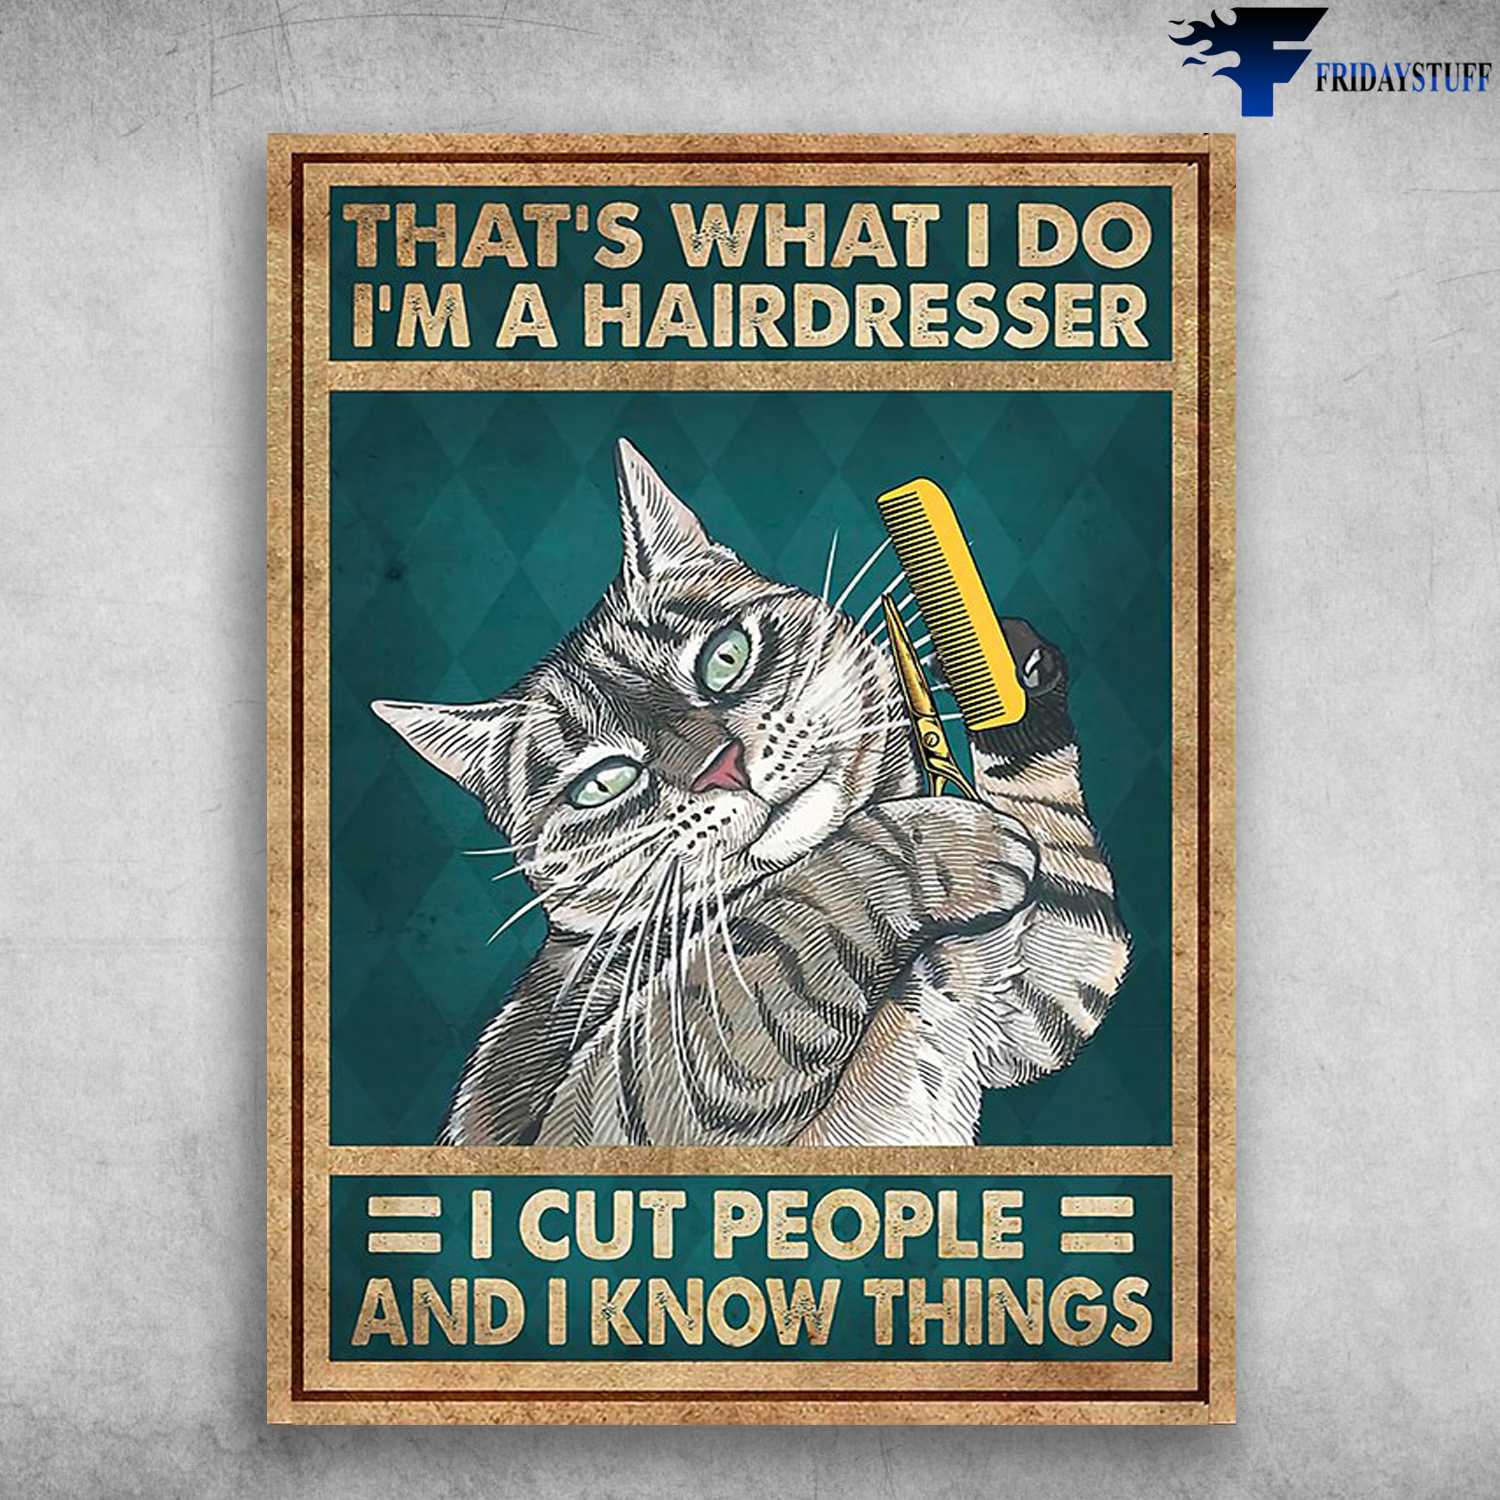 Cat Poster, Hairdresser Poster - That's What I Do, I'm A Hairdresser, I Cut People, And I Know Things